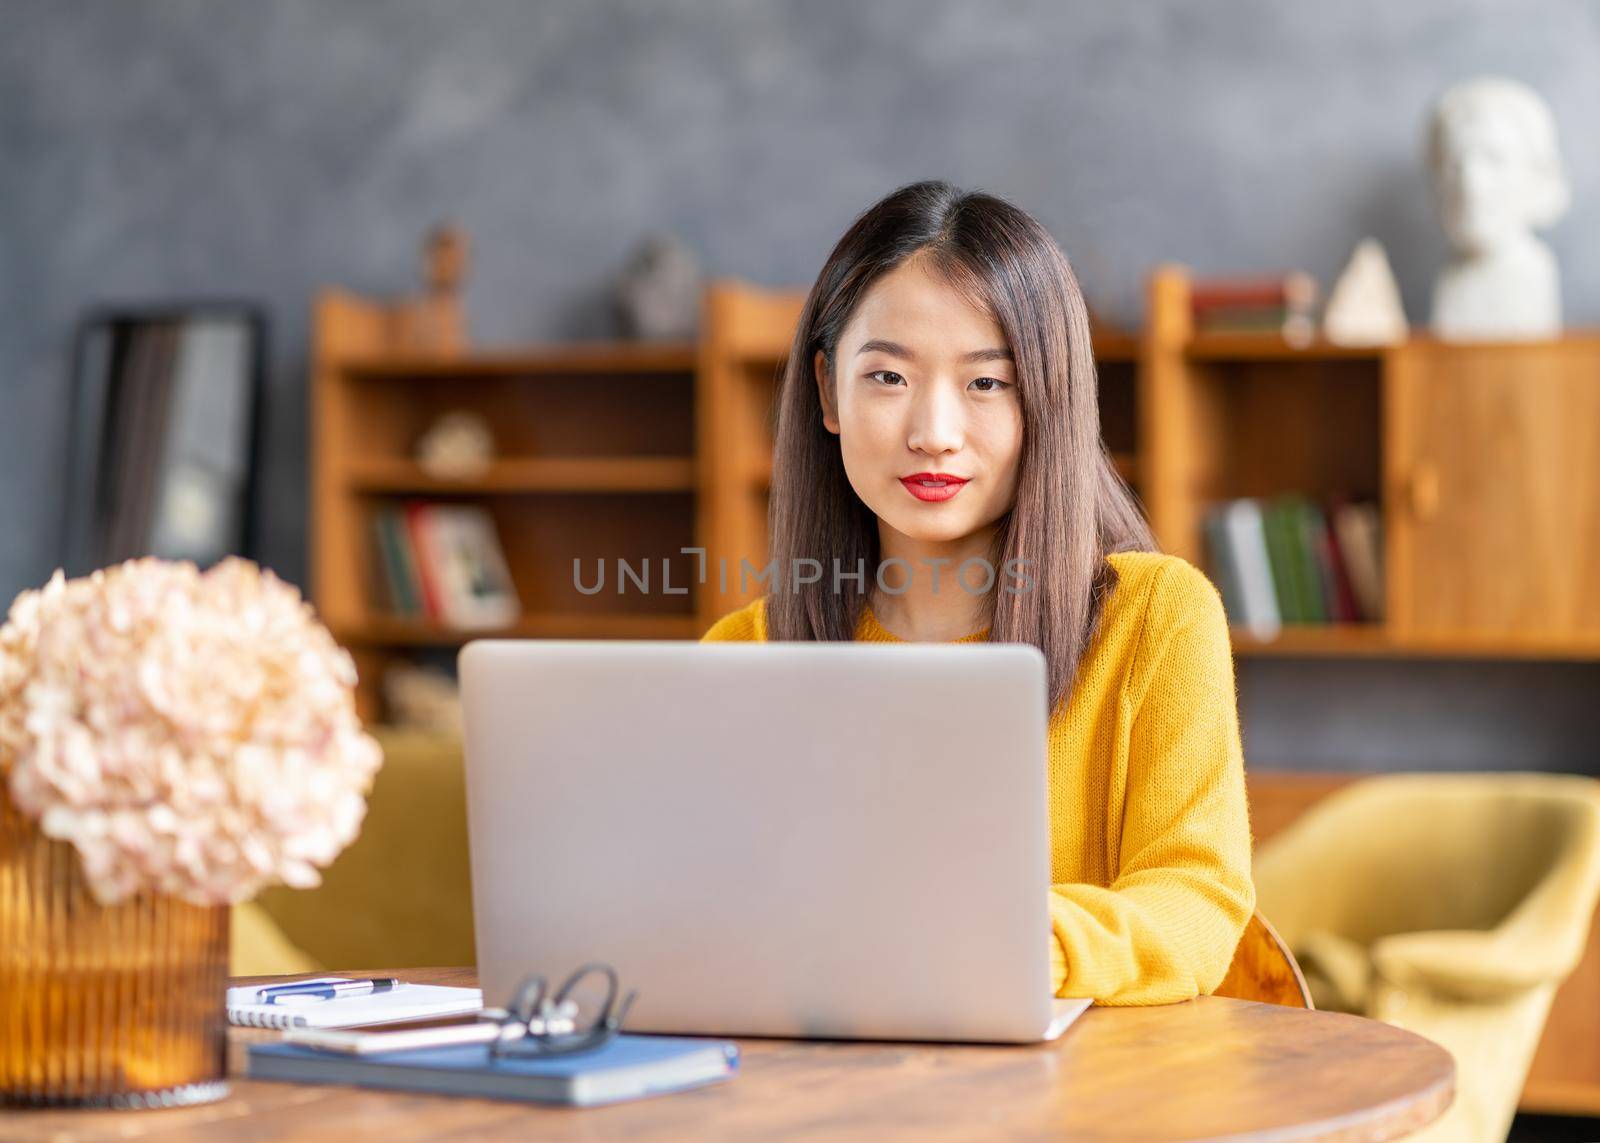 Asian woman working on laptop at home or in cafe. Young lady in bright yellow jumper by NataBene